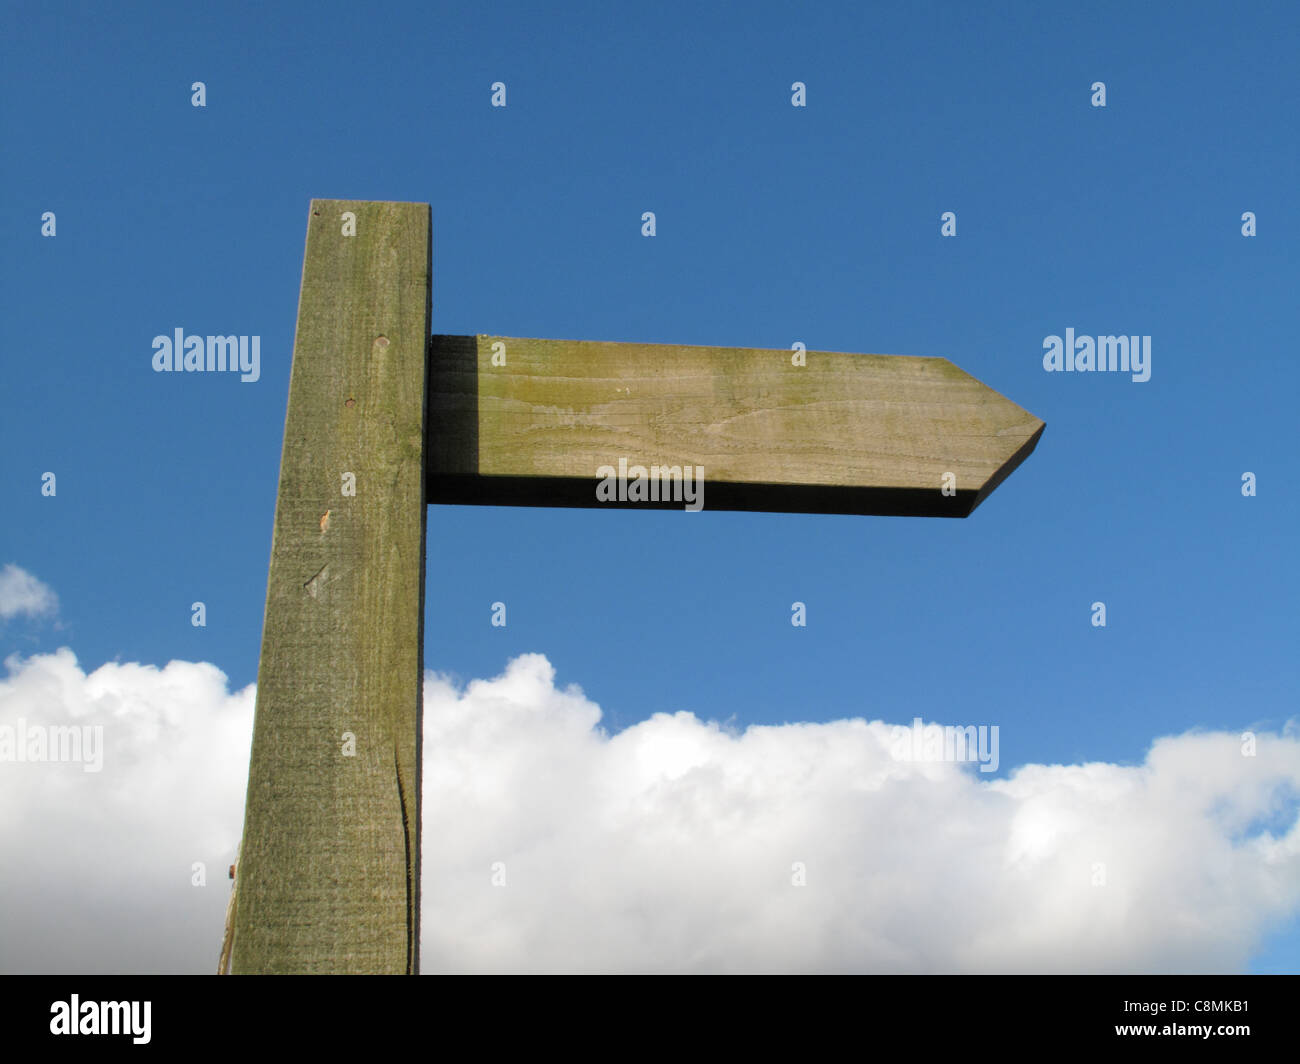 An blank wooden signpost against a blue sky with a bank of clouds. Stock Photo